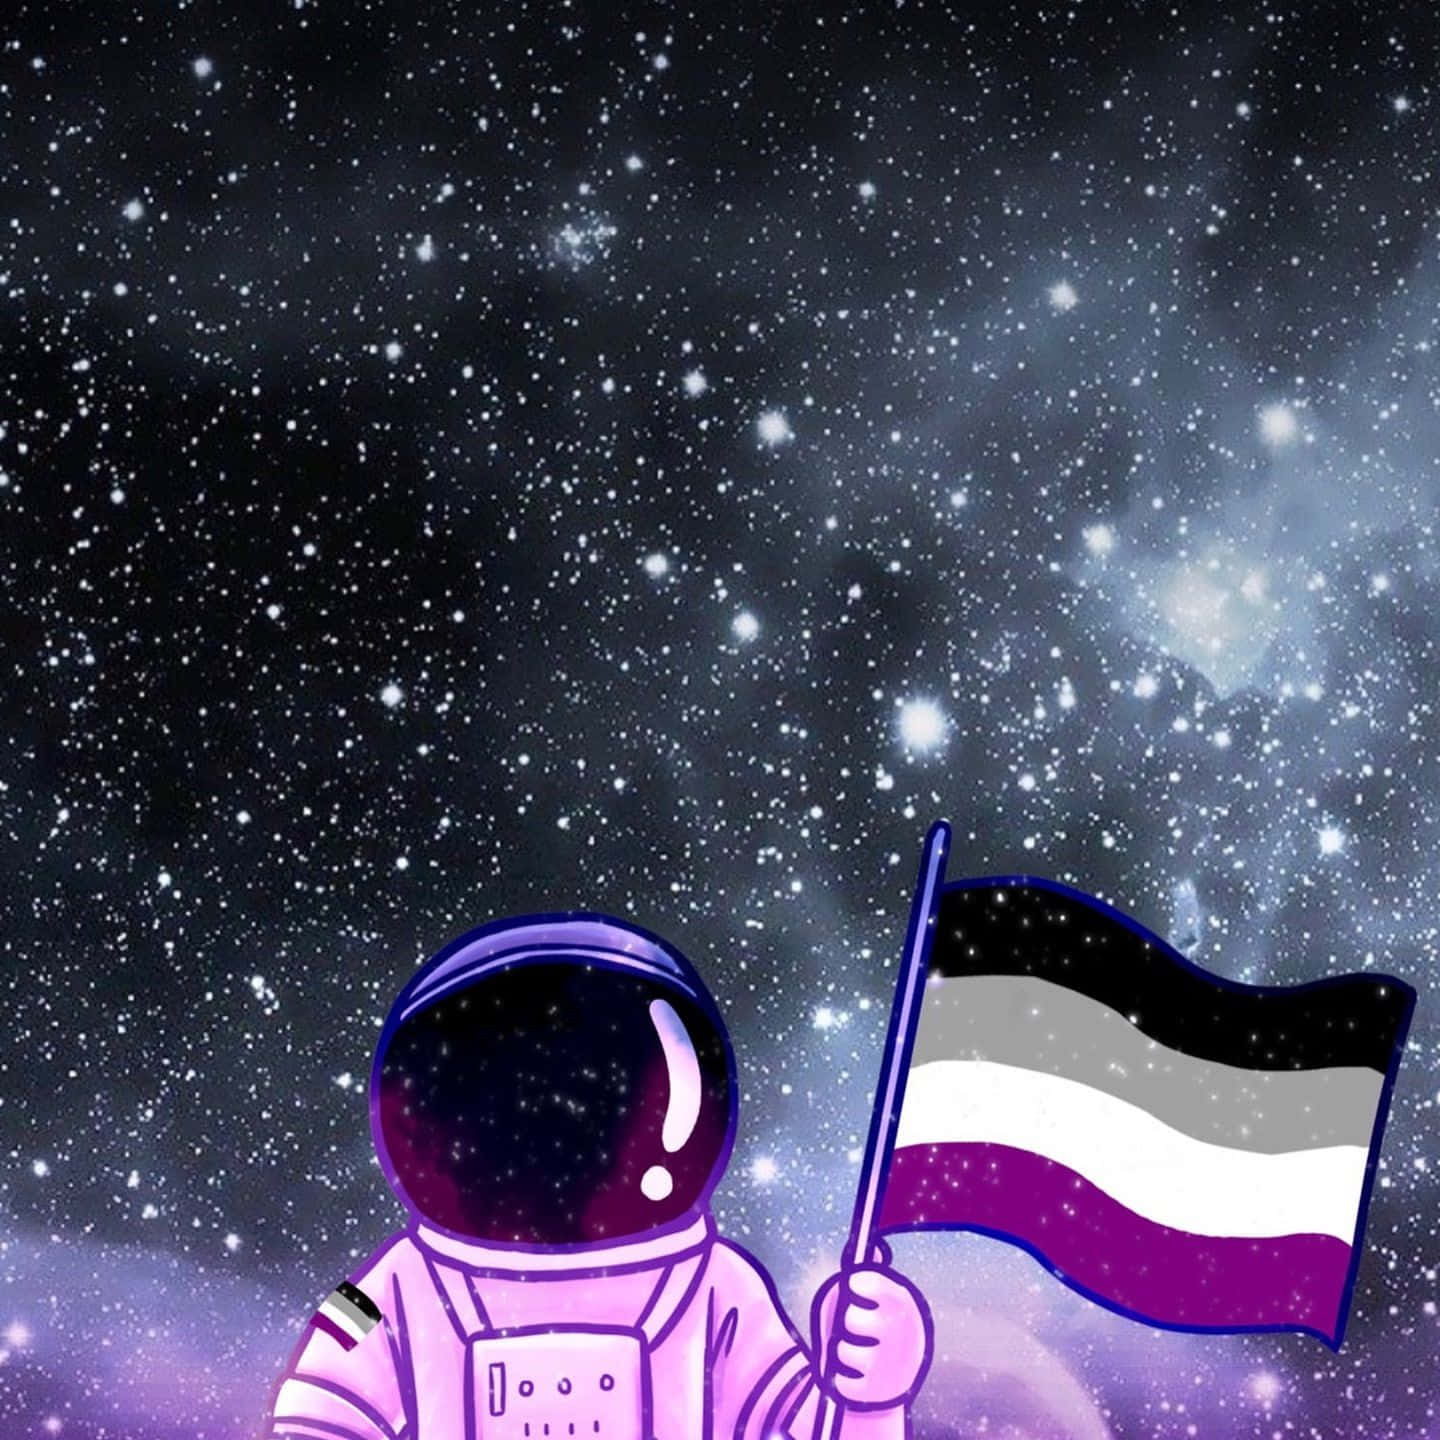 An astronaut floating in space holding an asexual pride flag. - Asexual